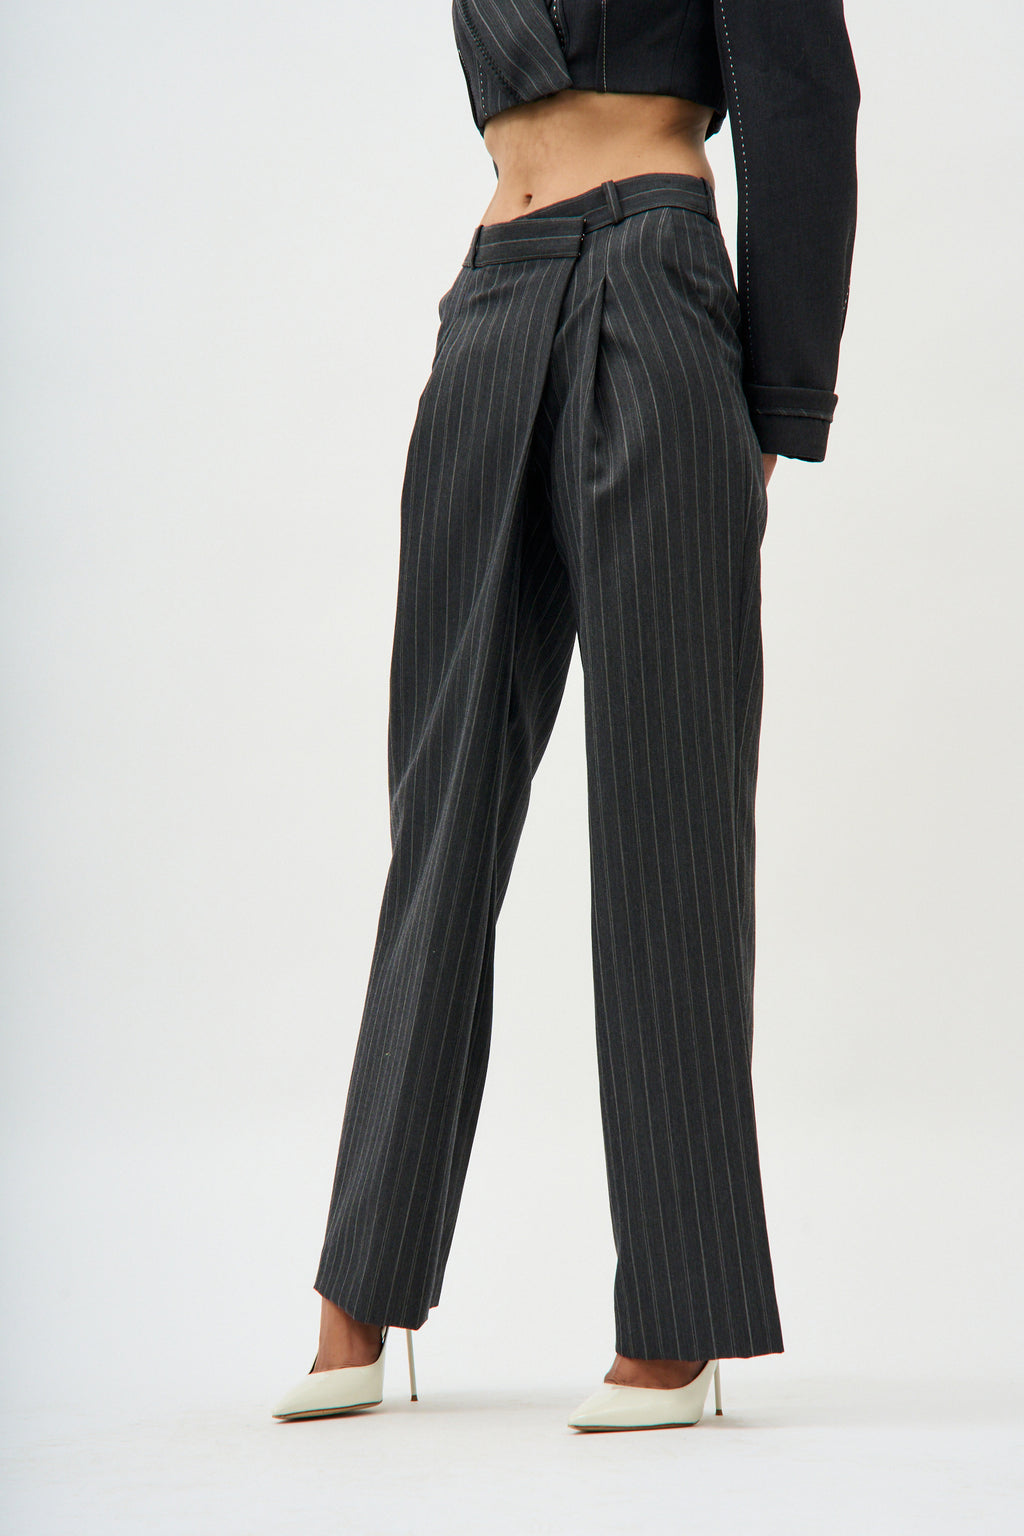 Archive At UO Black Pinstripe Ama Wide Leg Trousers | Urban Outfitters UK